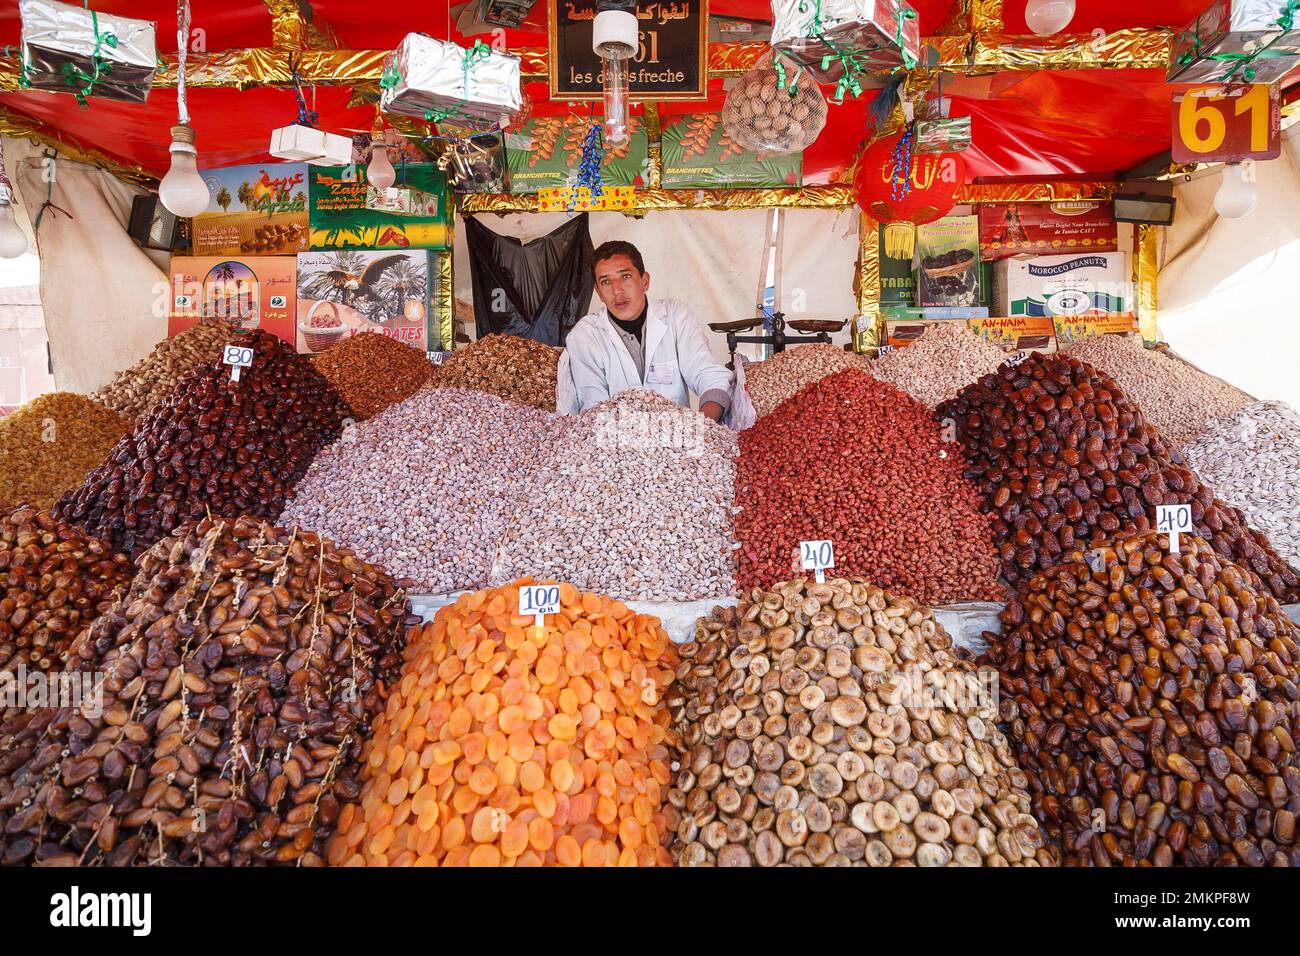 MARRAKESH, MOROCCO - March 10, 2007. Muslim man selling dates and other dried fruit on a market stall in Medina souk, Marrakech, Morocco Stock Photo